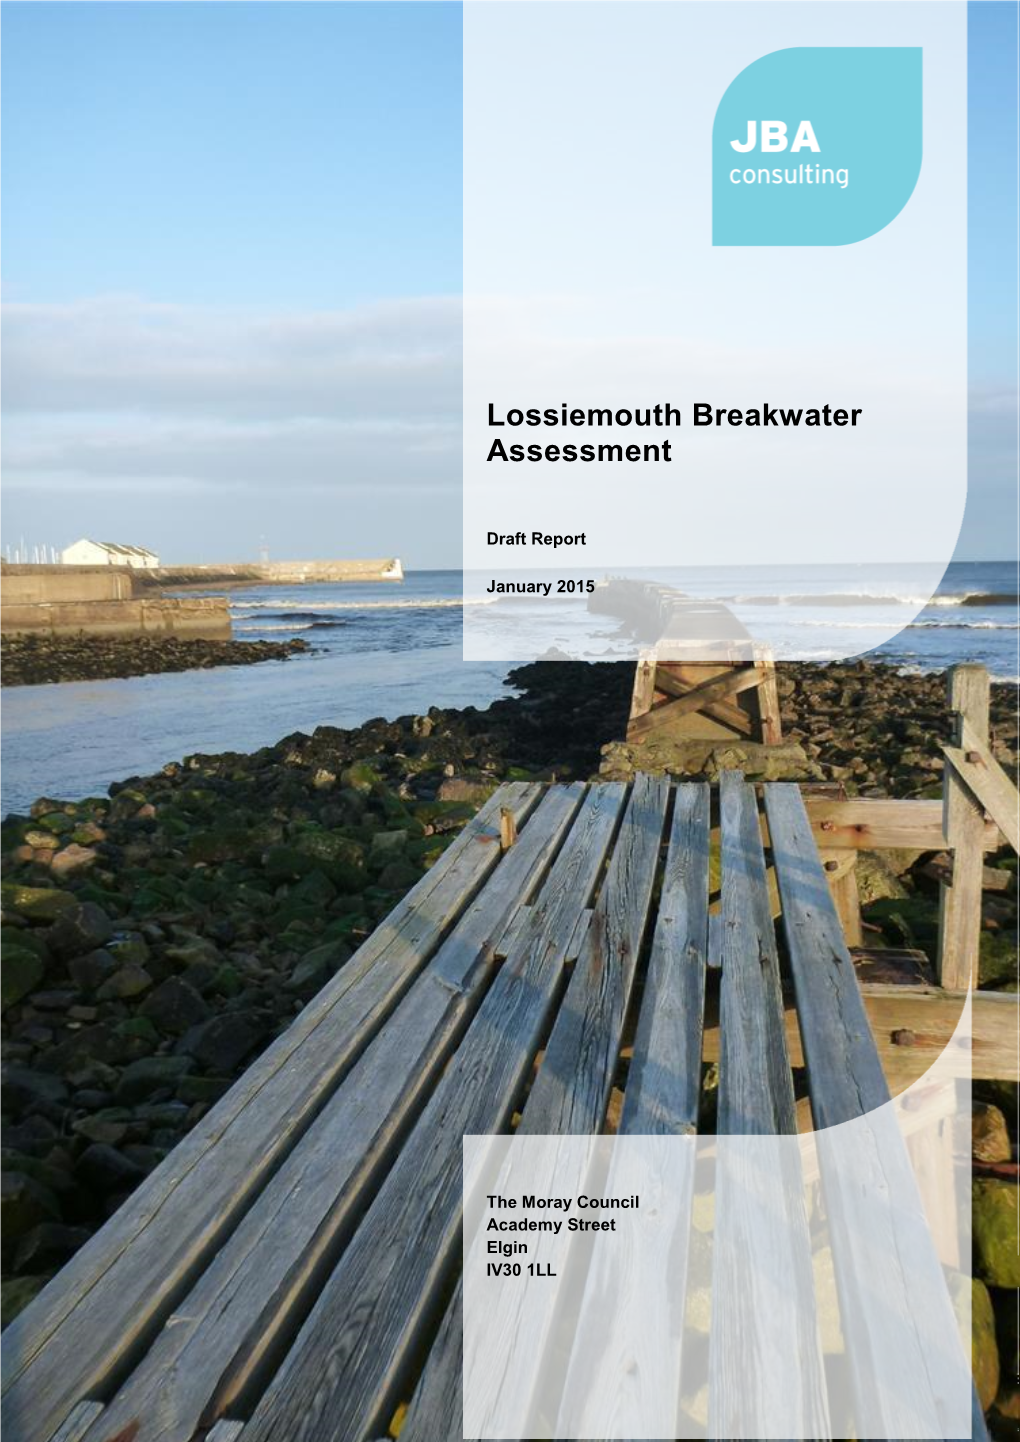 Lossiemouth Breakwater Assessment